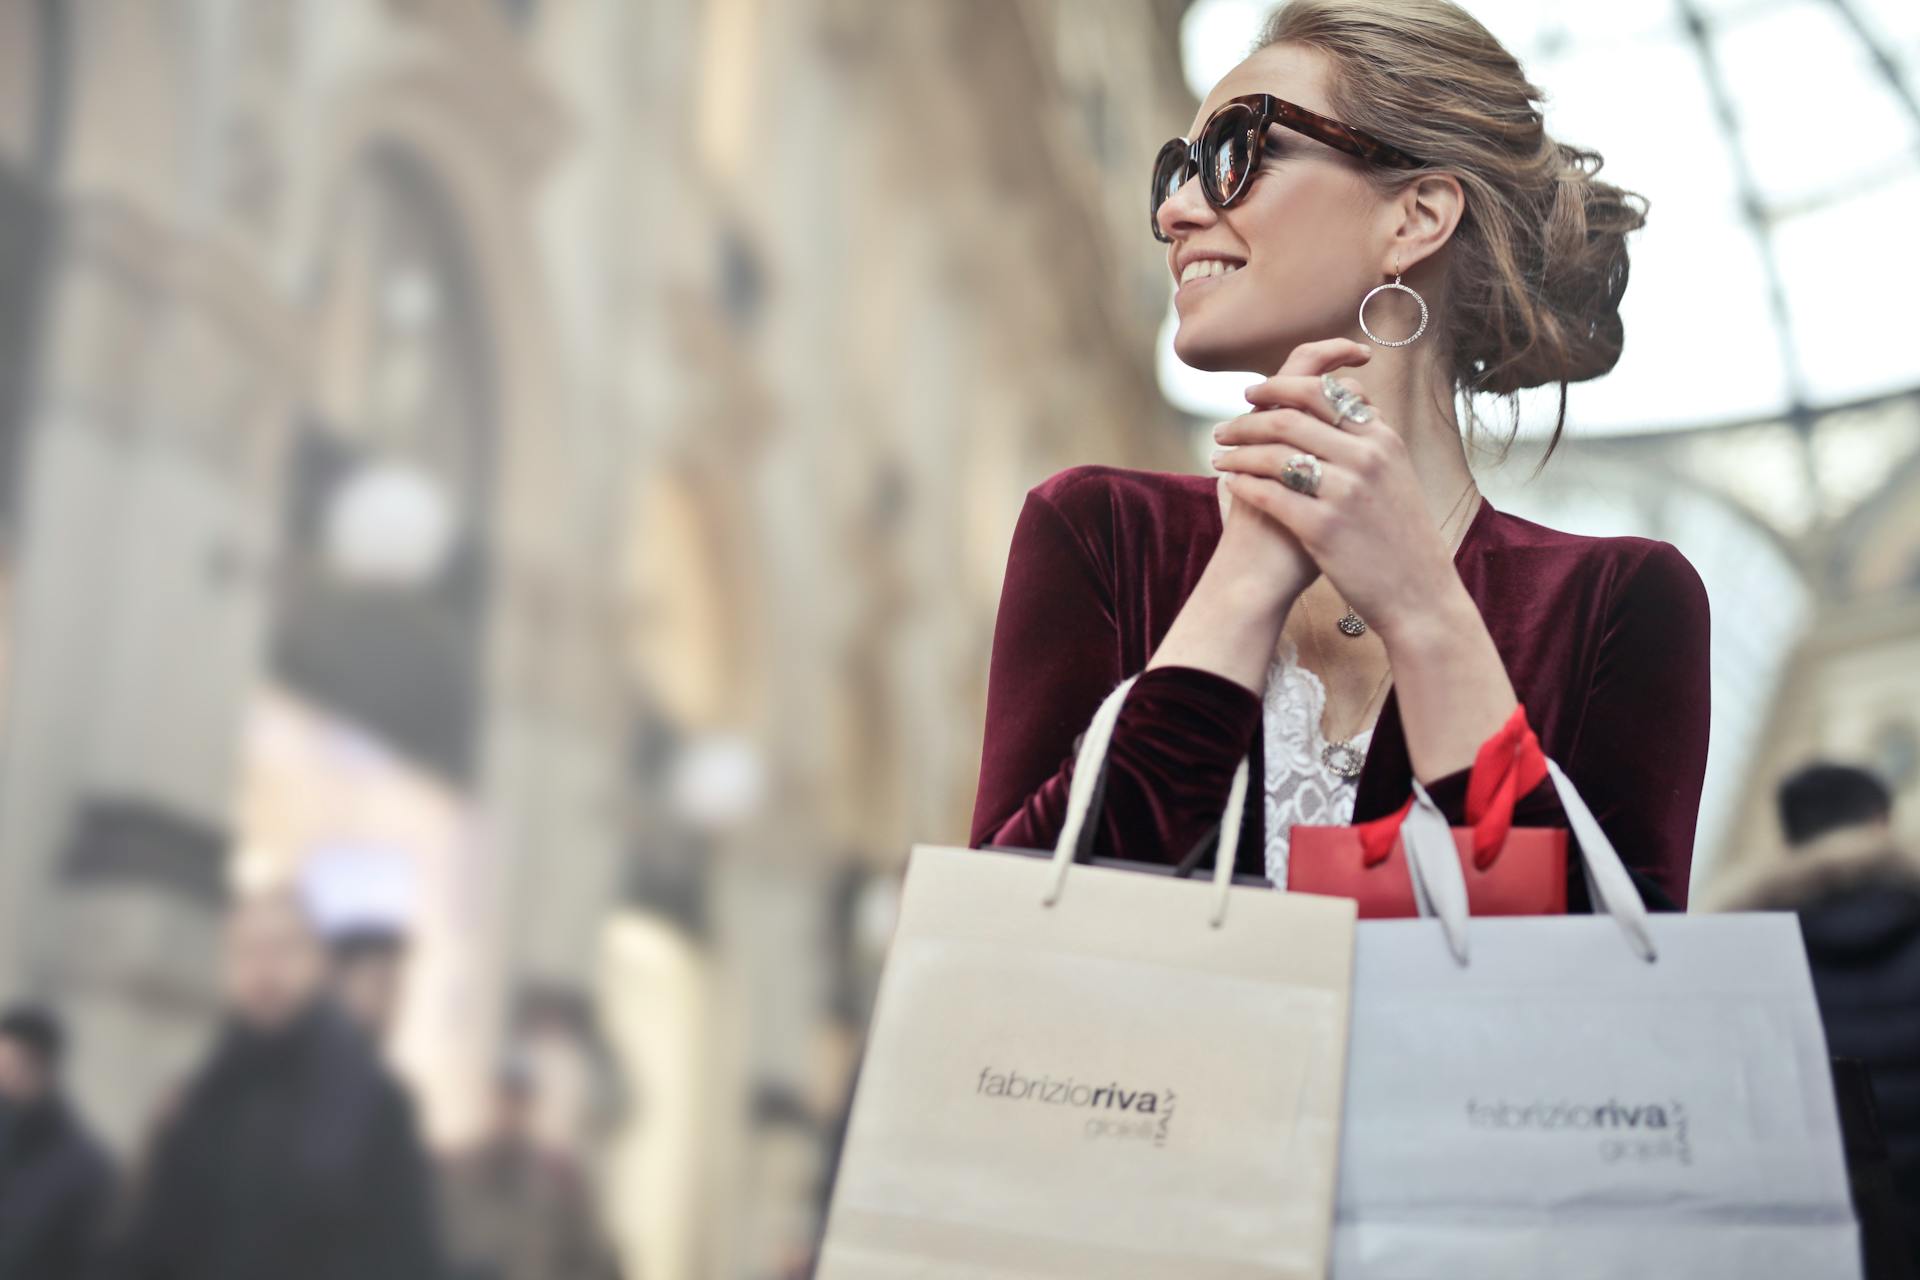 A woman holding shopping bags | Source: Pexels